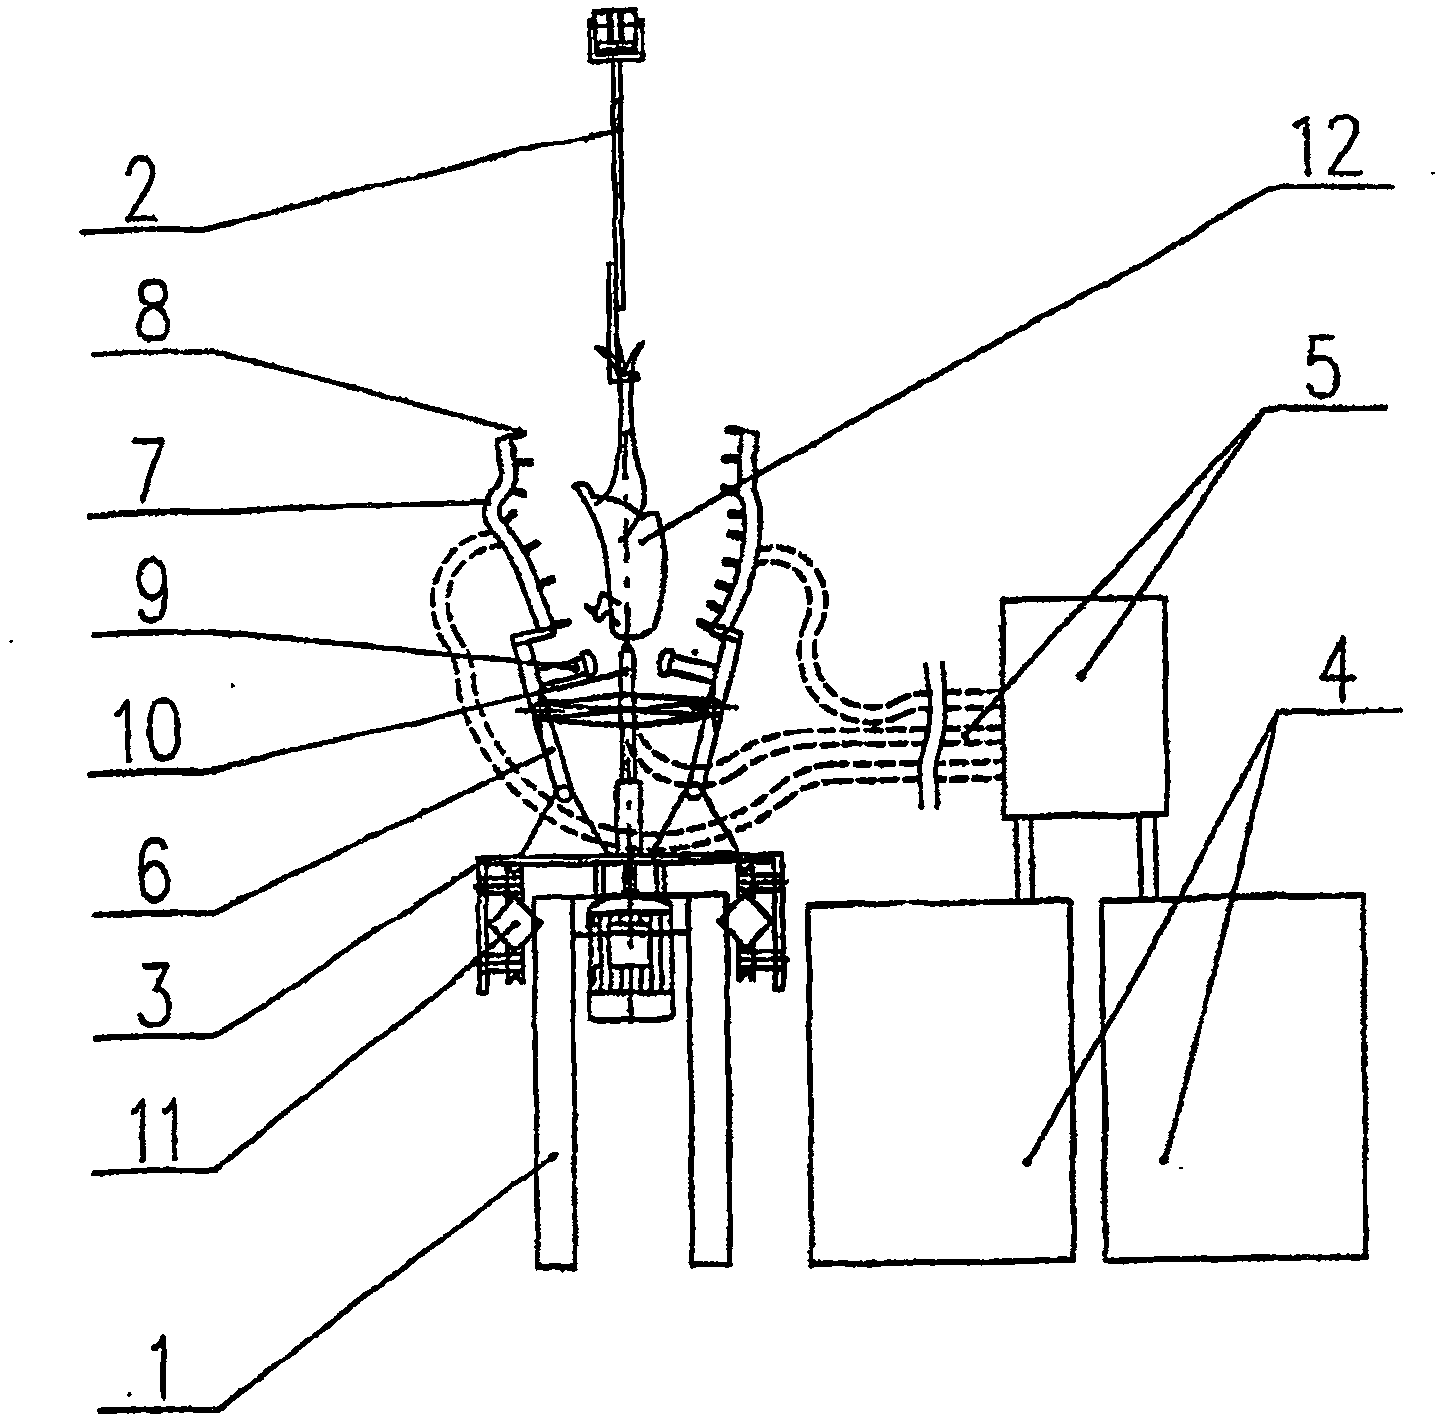 Device and method for introducing liquids into meat